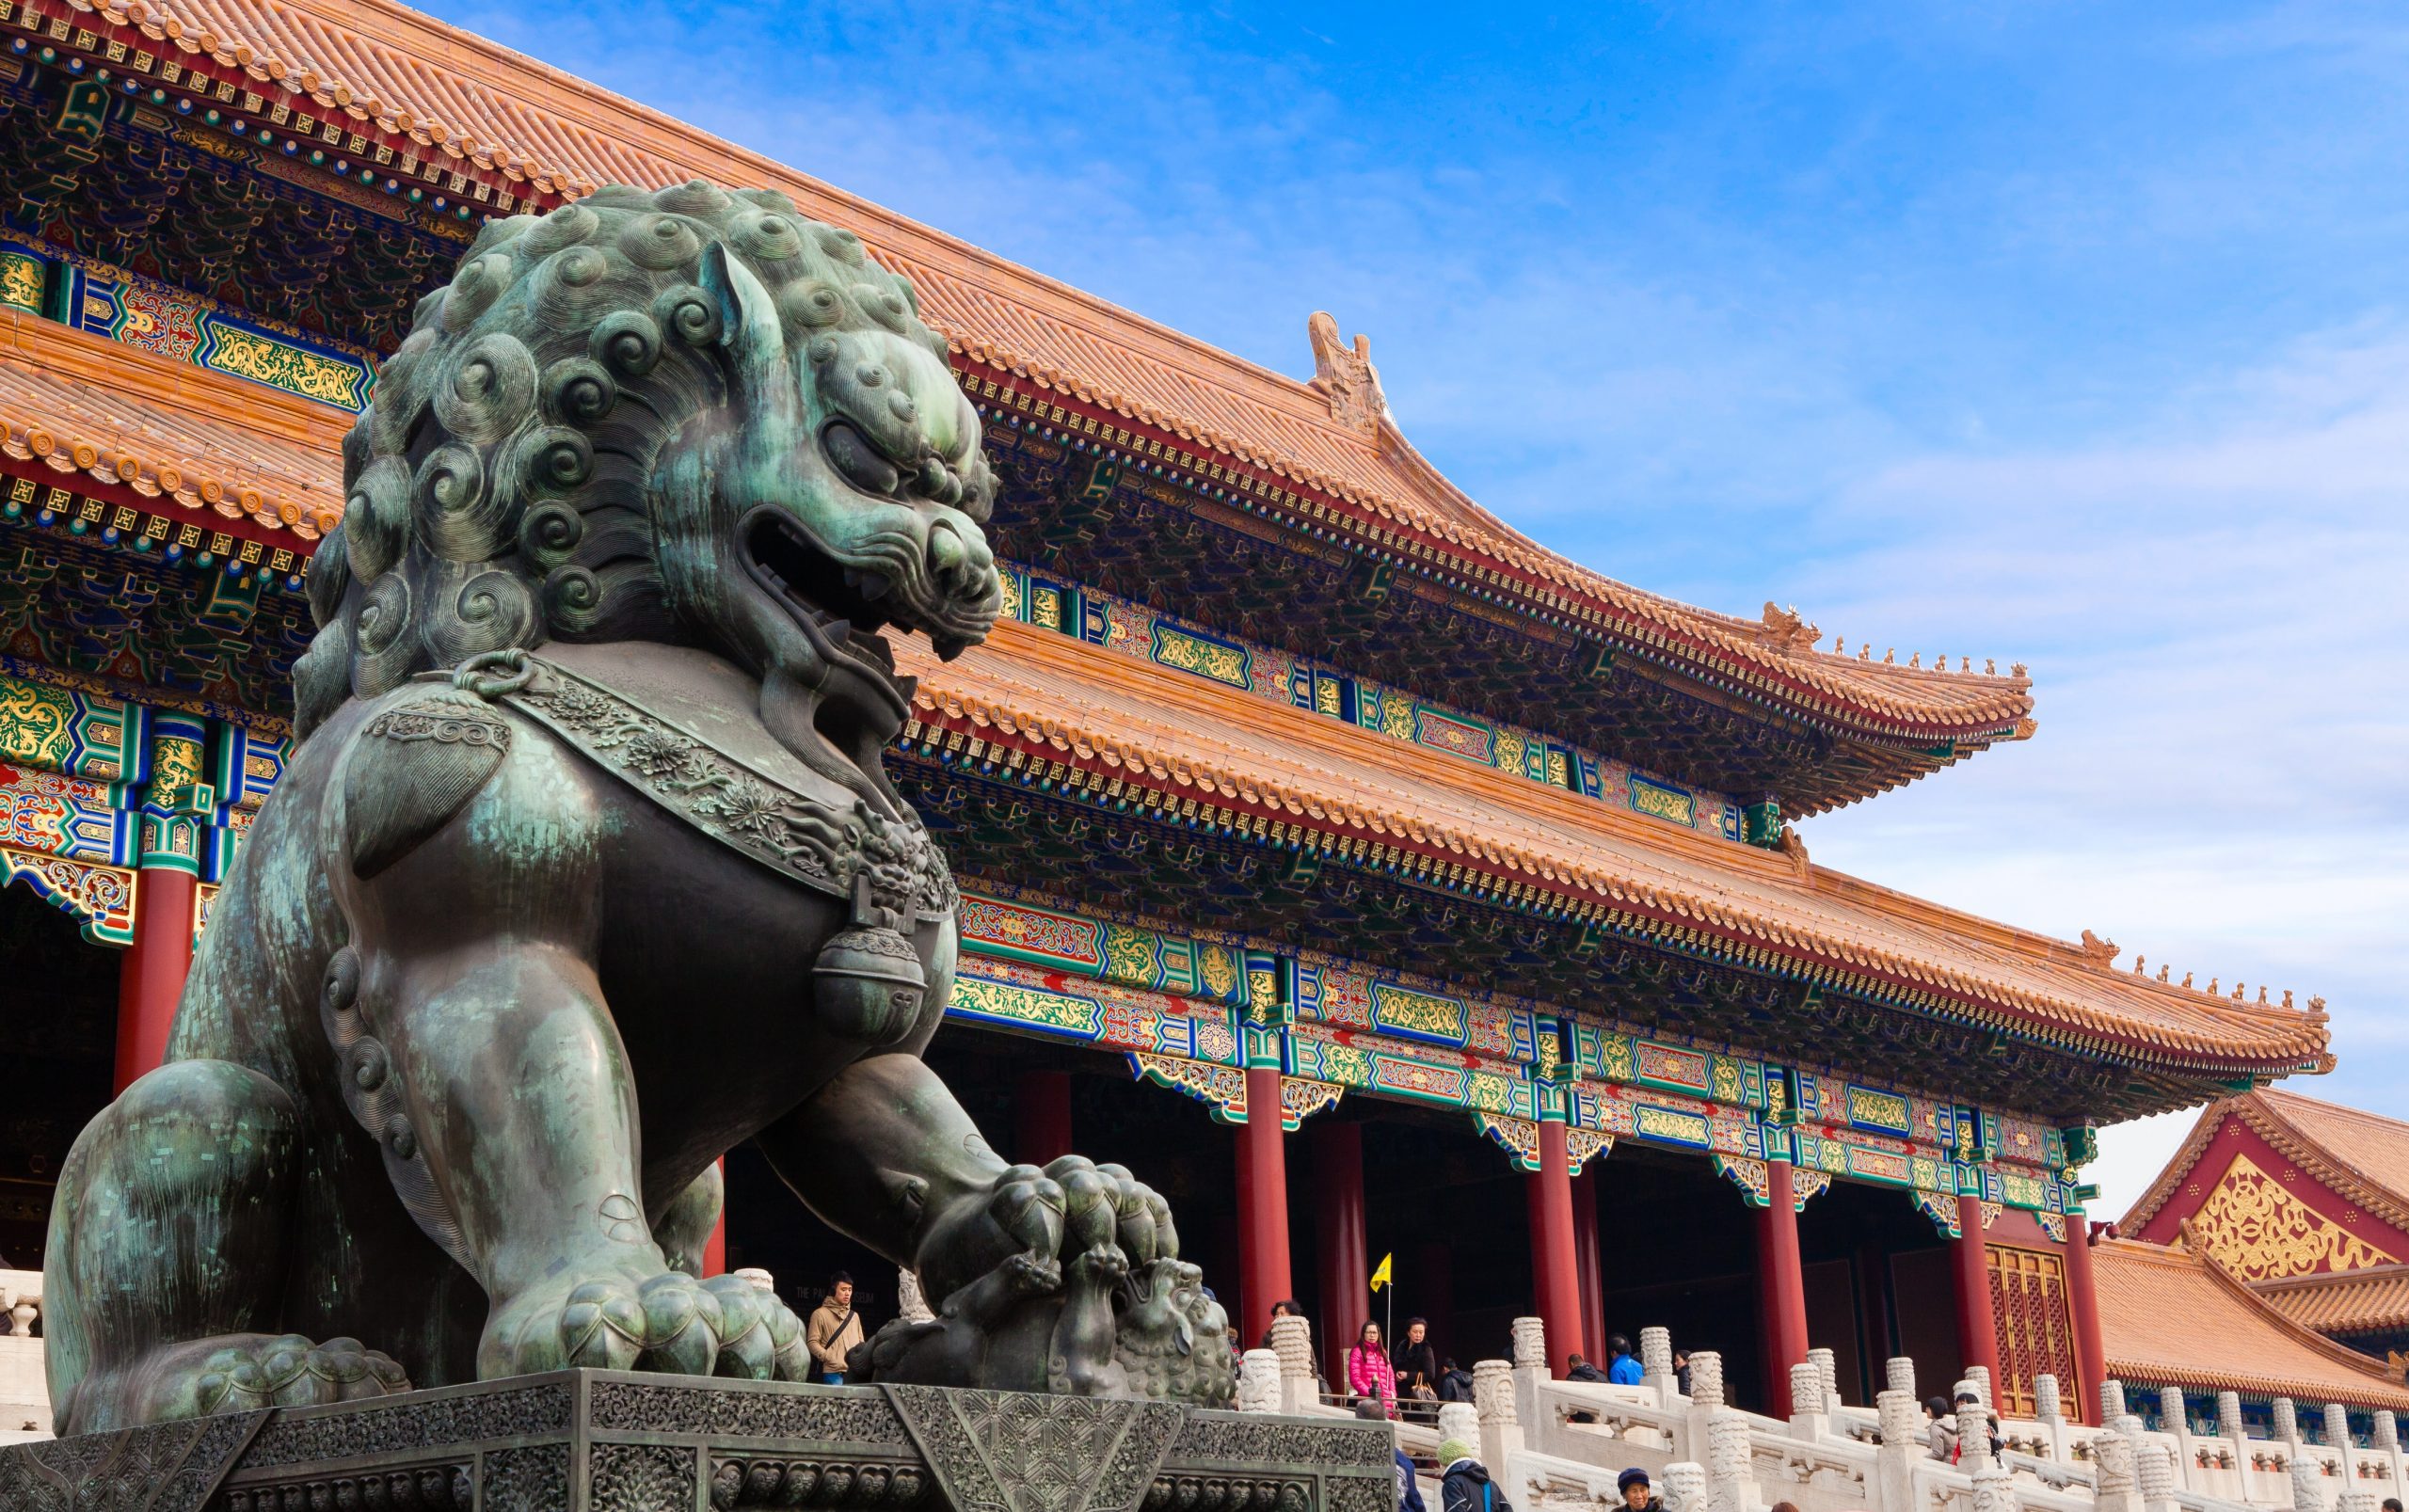 The Hall of Supreme Harmony - the largest hall within the Forbidden City